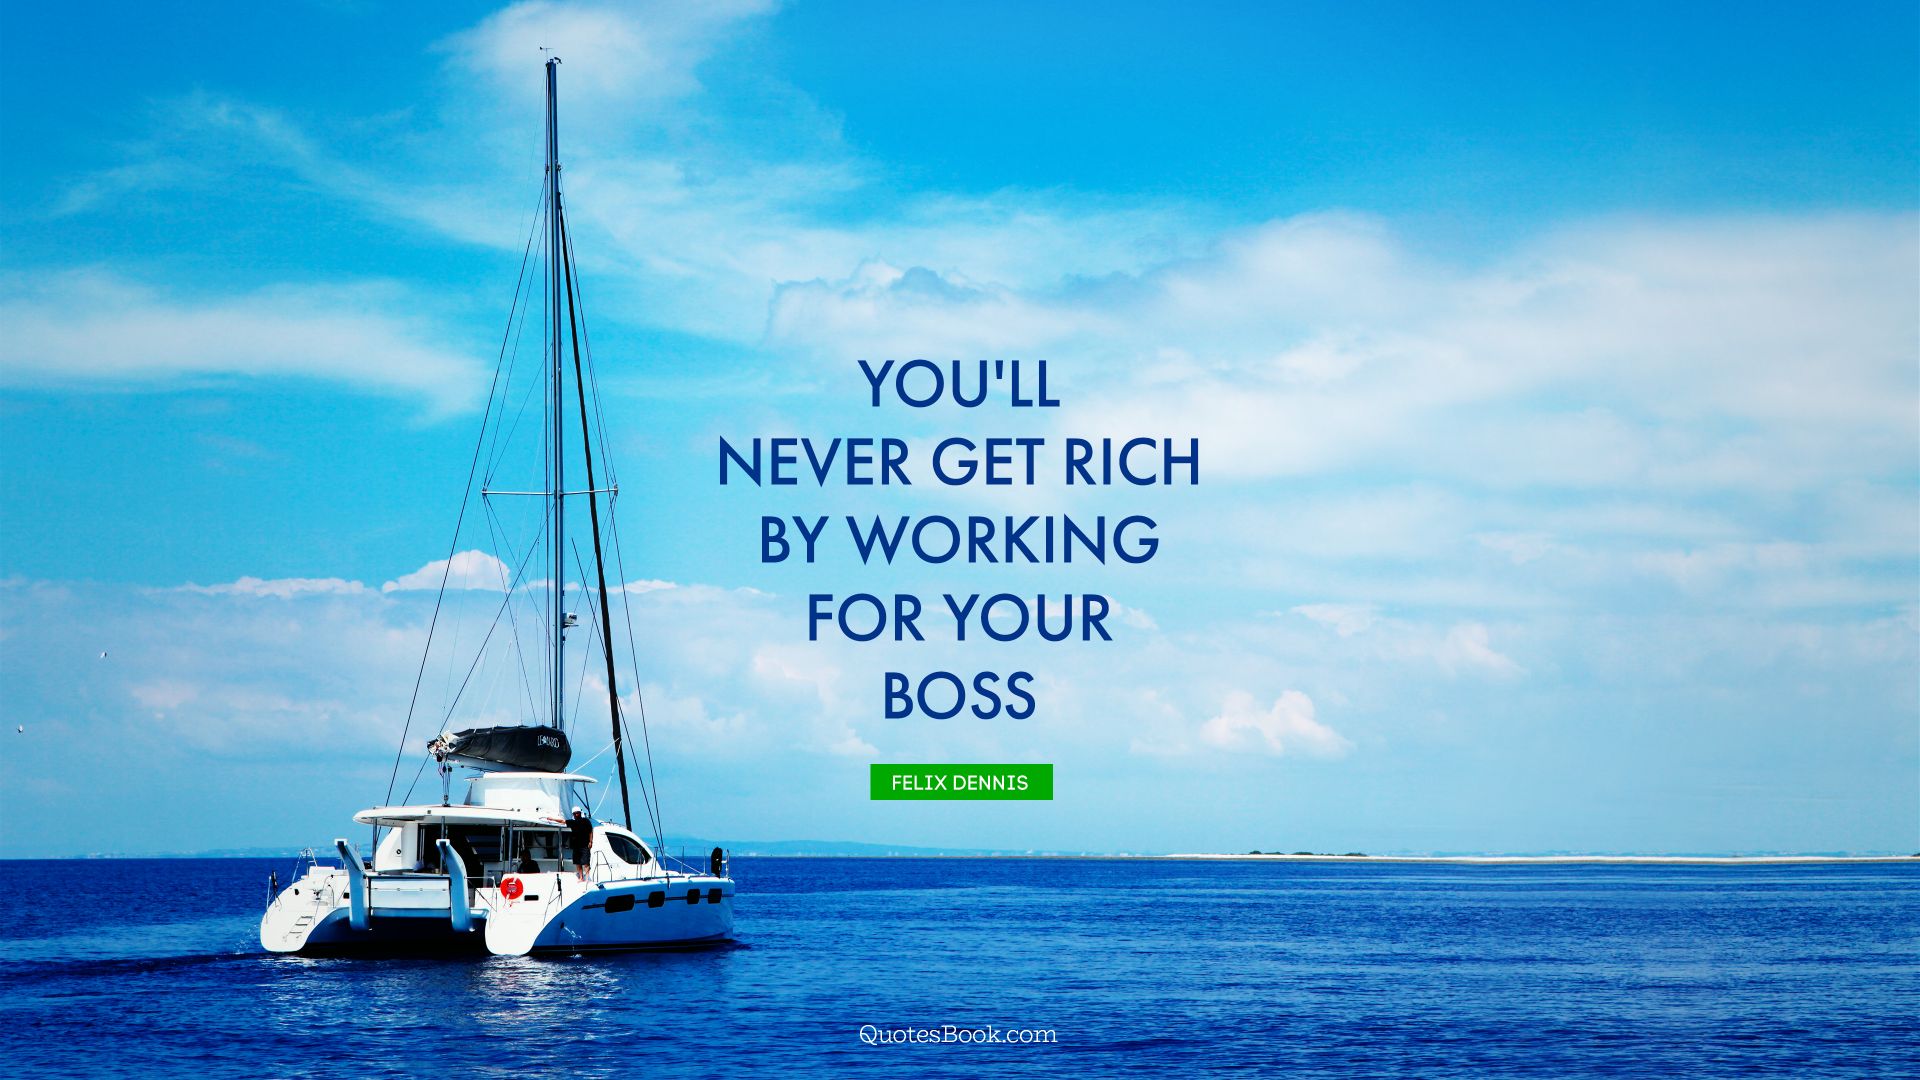 You'll never get rich by working for your boss. - Quote by Felix Dennis